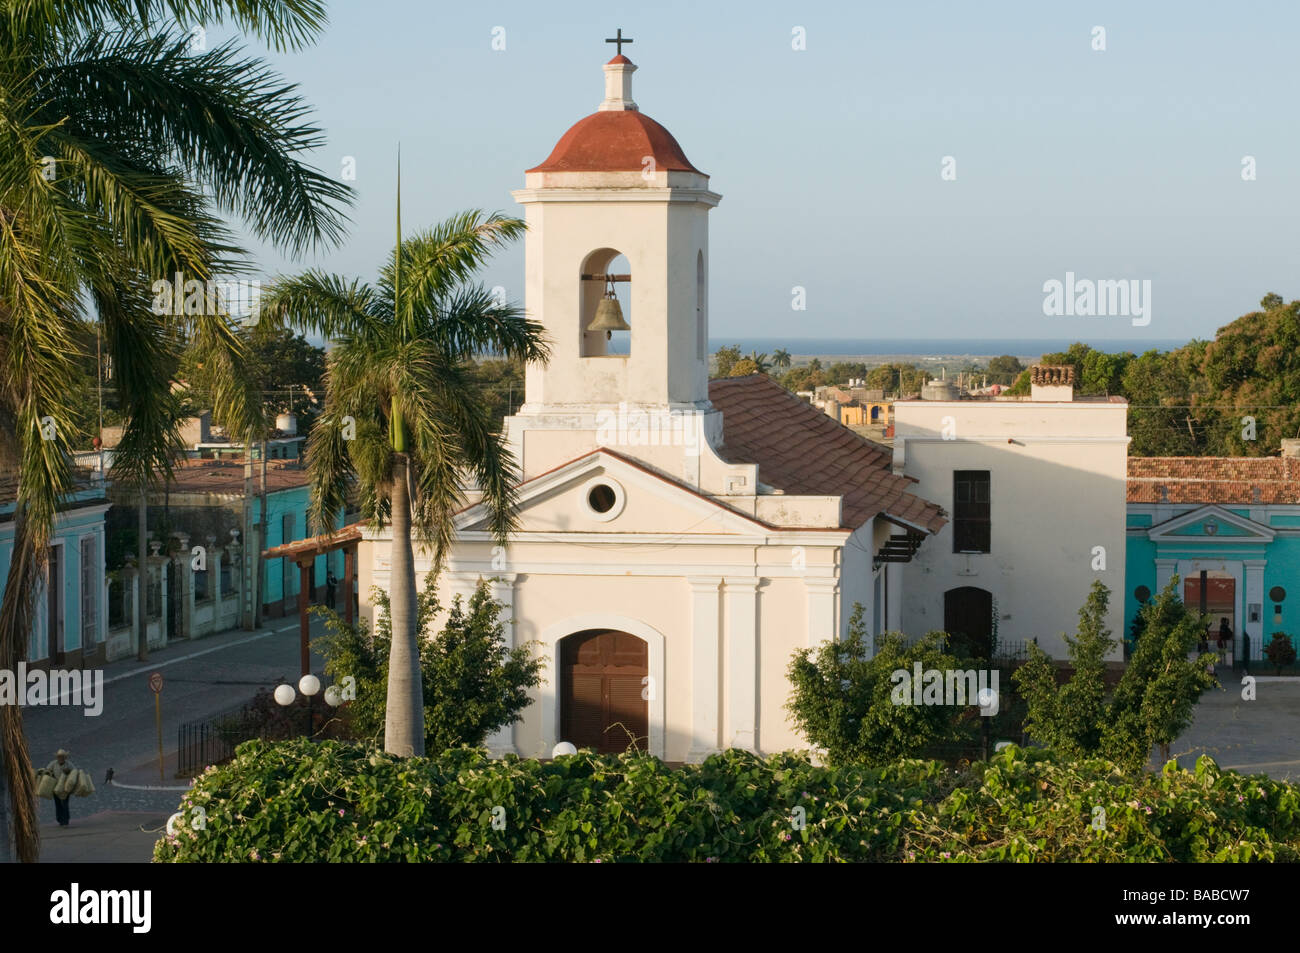 Colonial style church on a major square in the 16th century city of Trinidad, Cuba. Stock Photo